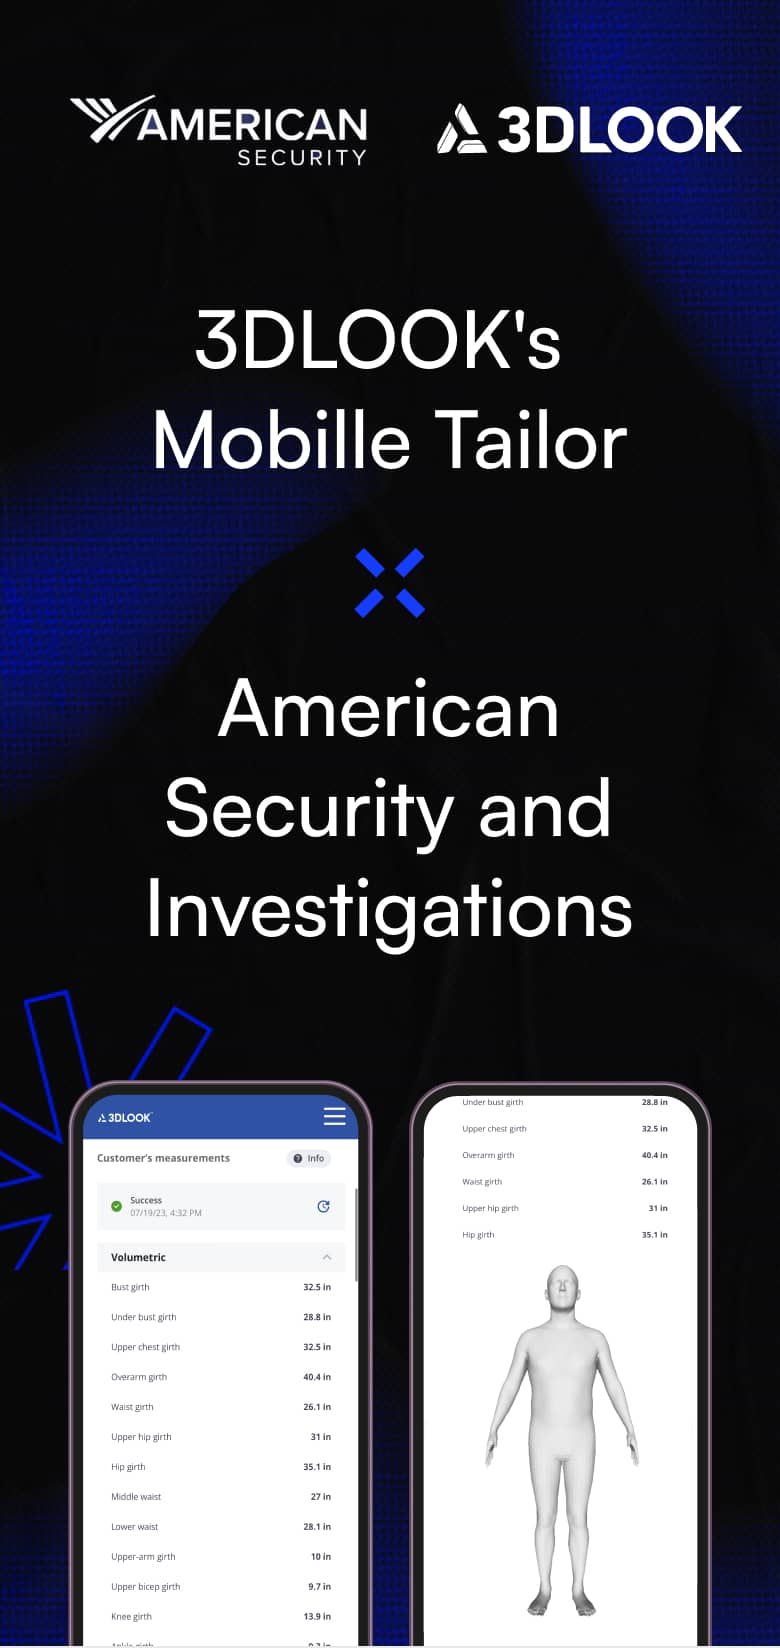 3dlook's mobile tailor ensures uniform sizing and accuracy for American security and investigations.